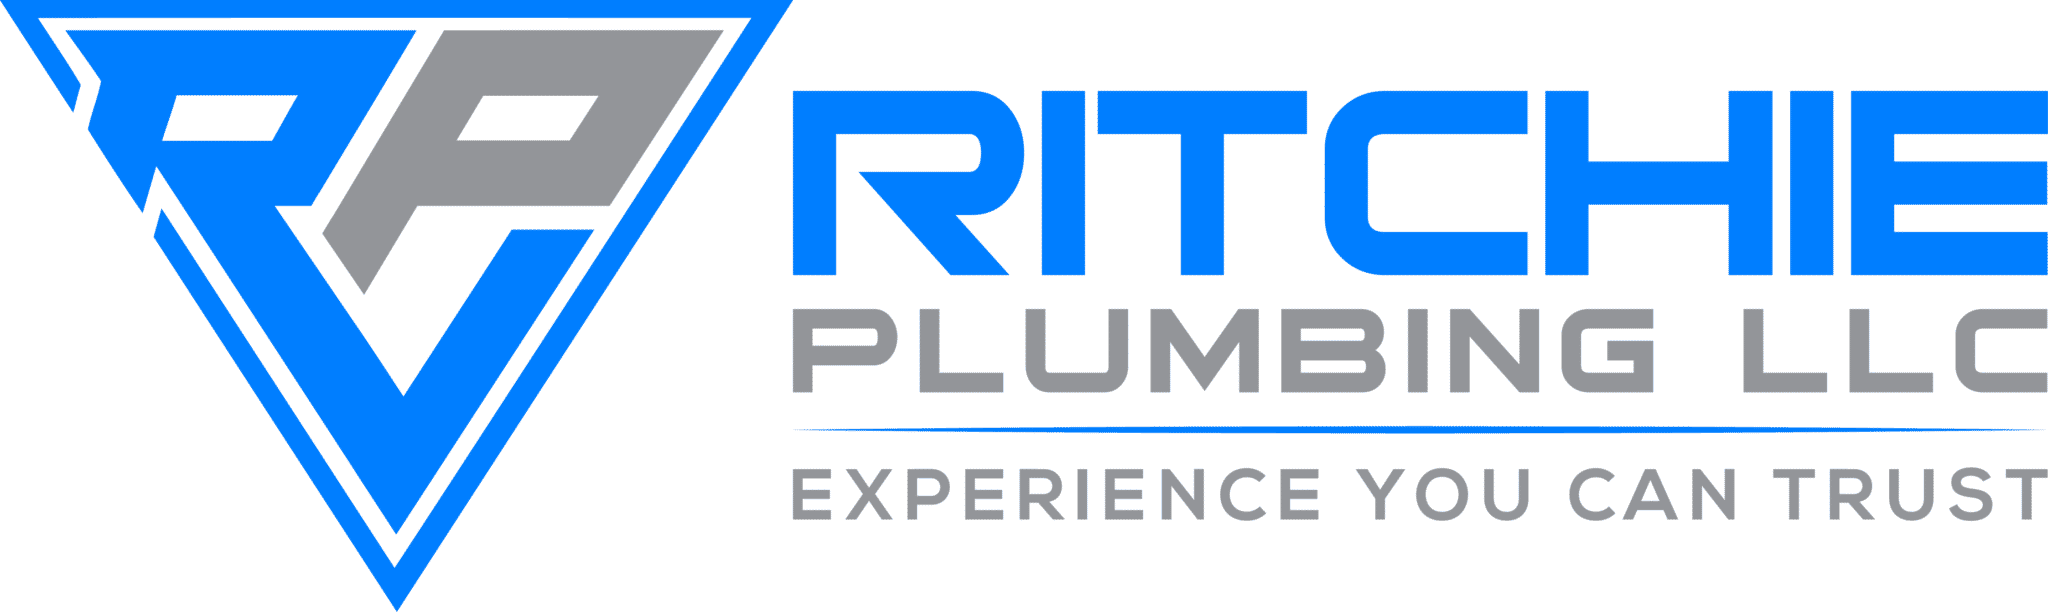 A stylized, triangular logo with an angular 'R' and 'P' nestled inside. Ritchie Plumbing LLC - Experience you can trust.